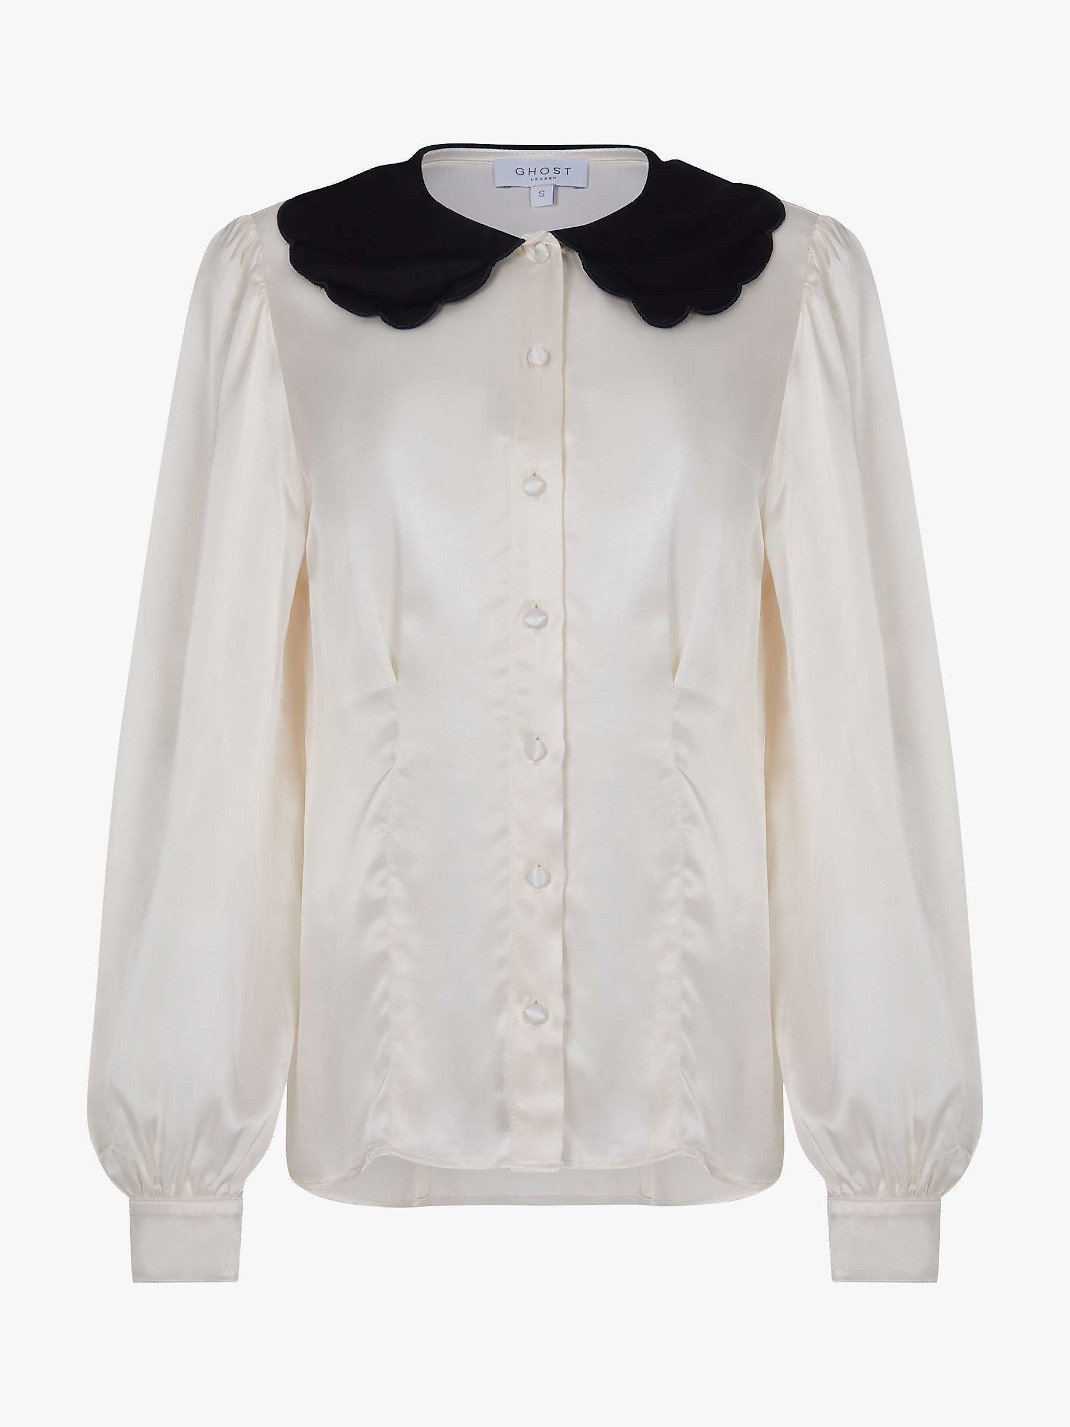 Ghost blouse